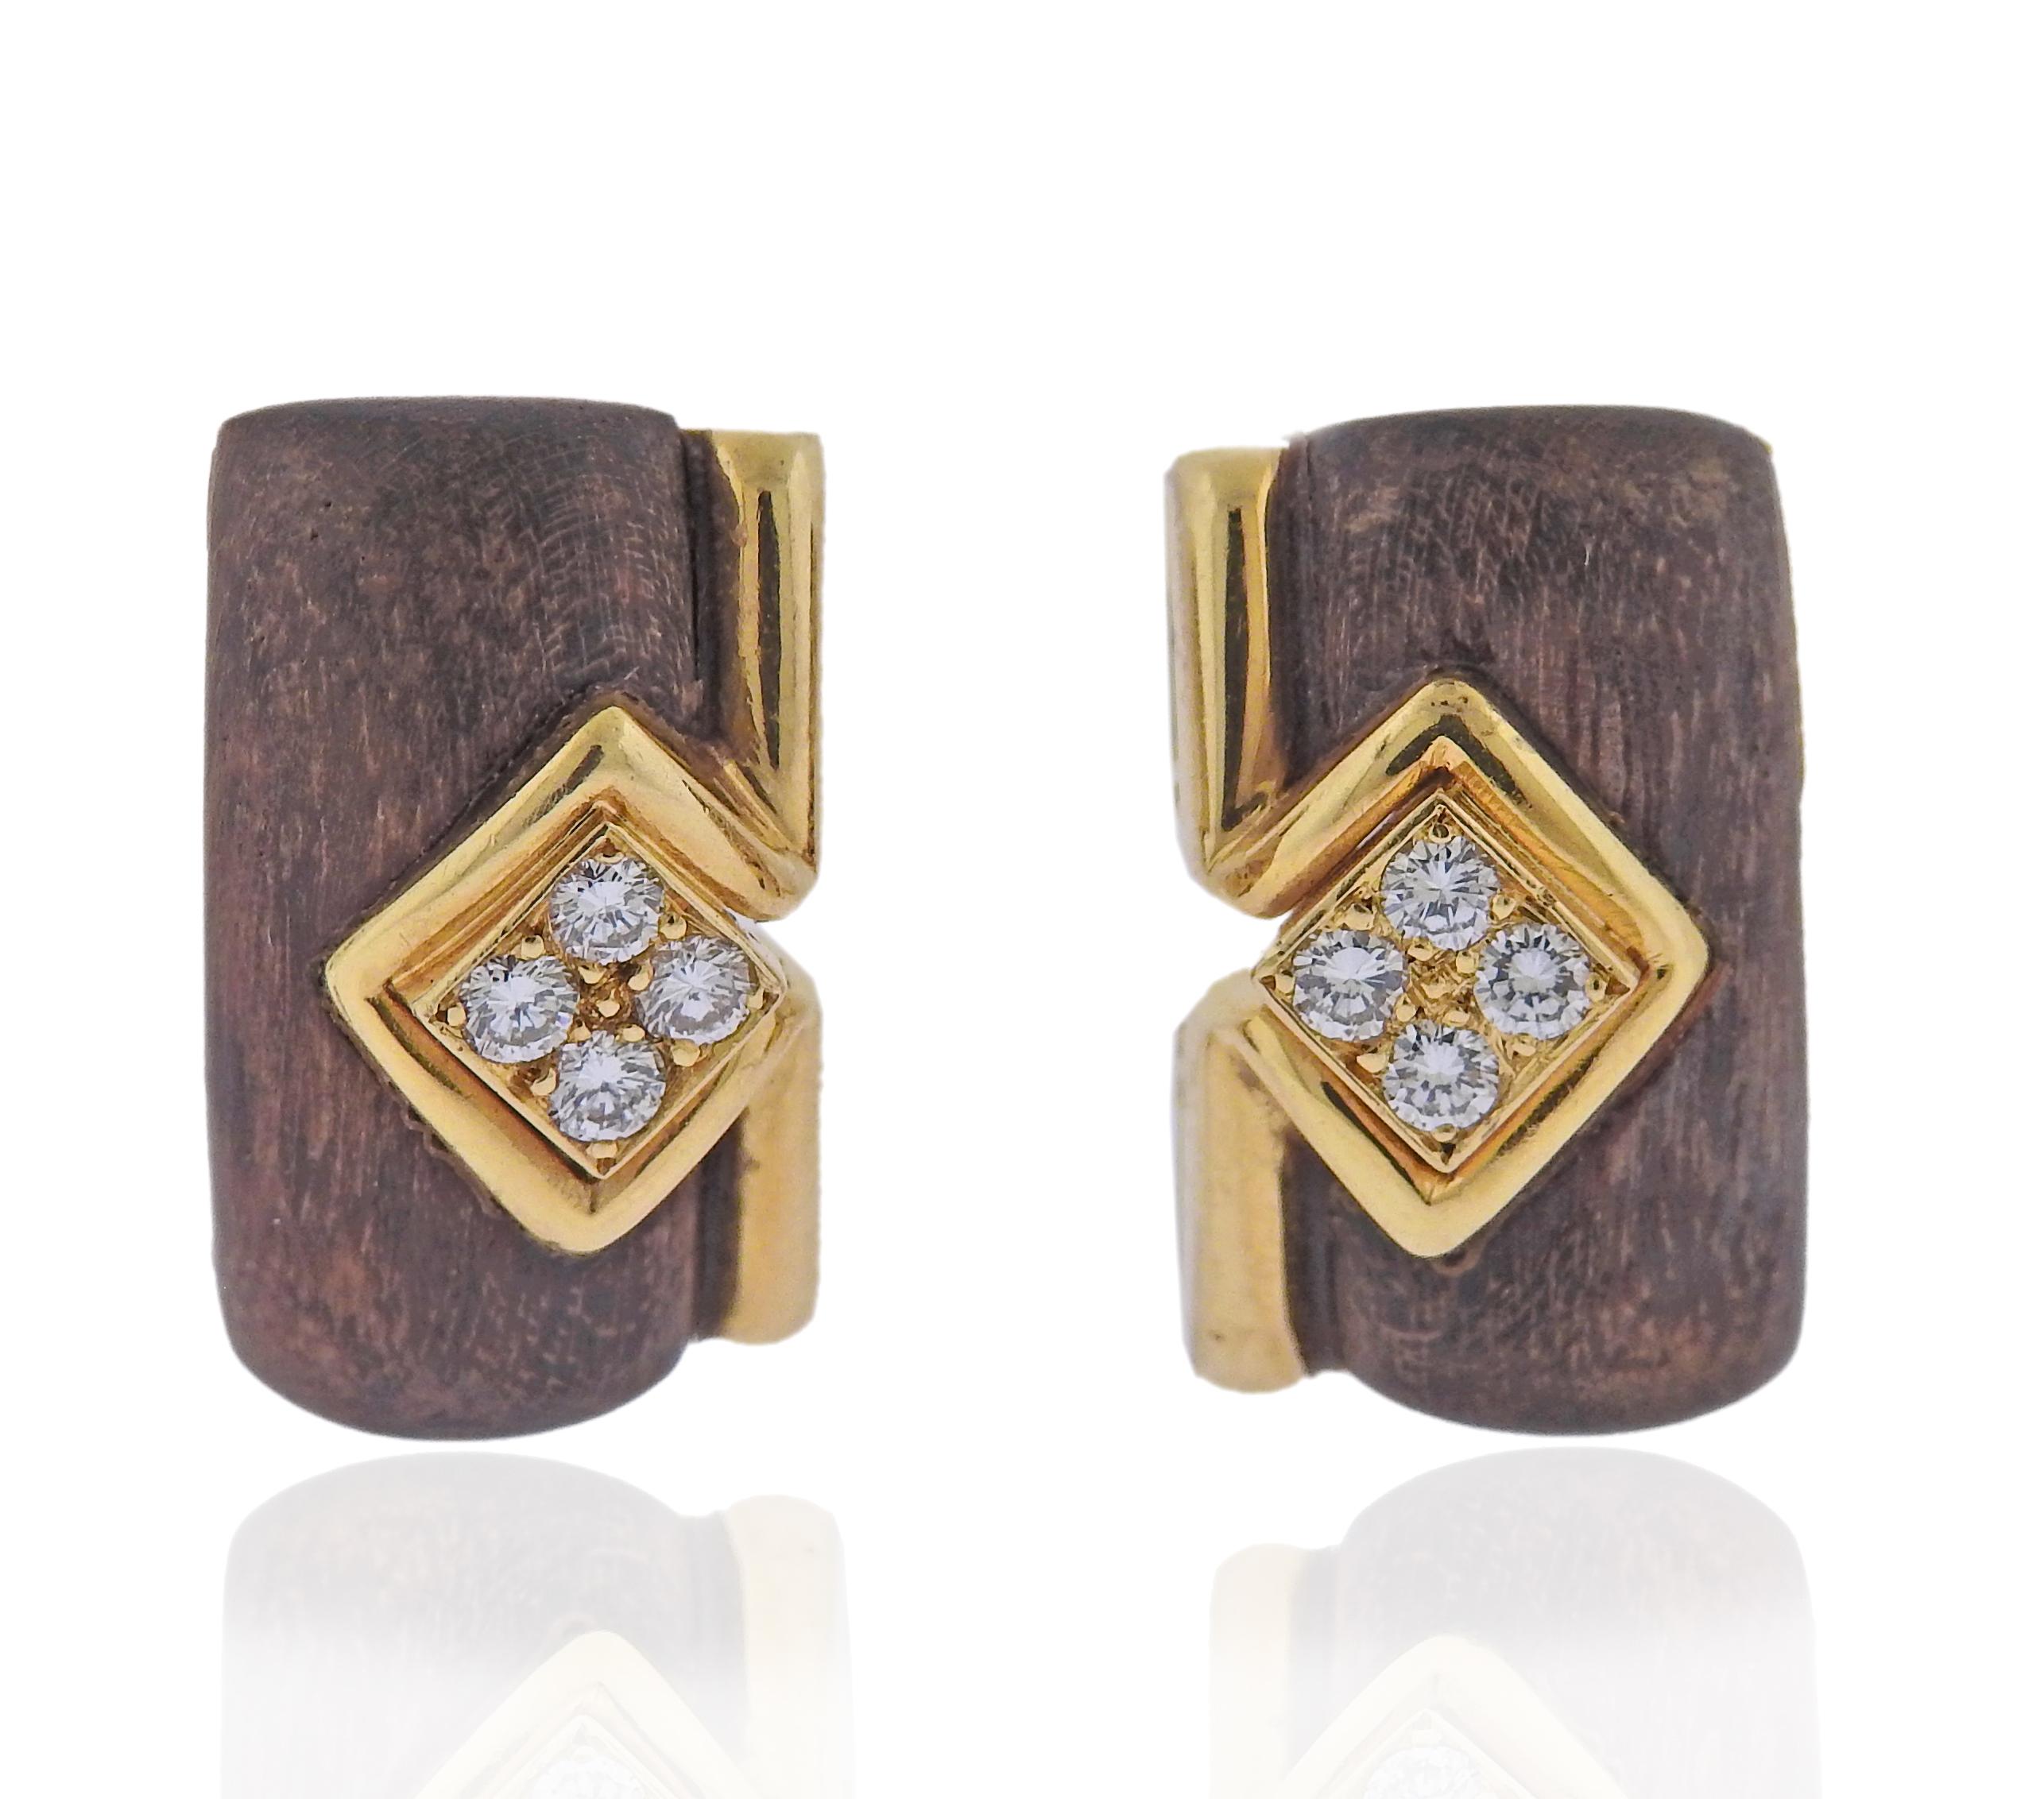 Pair of 18k gold Boucheron earrings with wood and approx. 0.40ctw G/VS diamonds. Measure 20 x 12mm. Weight 13.9 grams. Marked with Boucheron and French marks. 